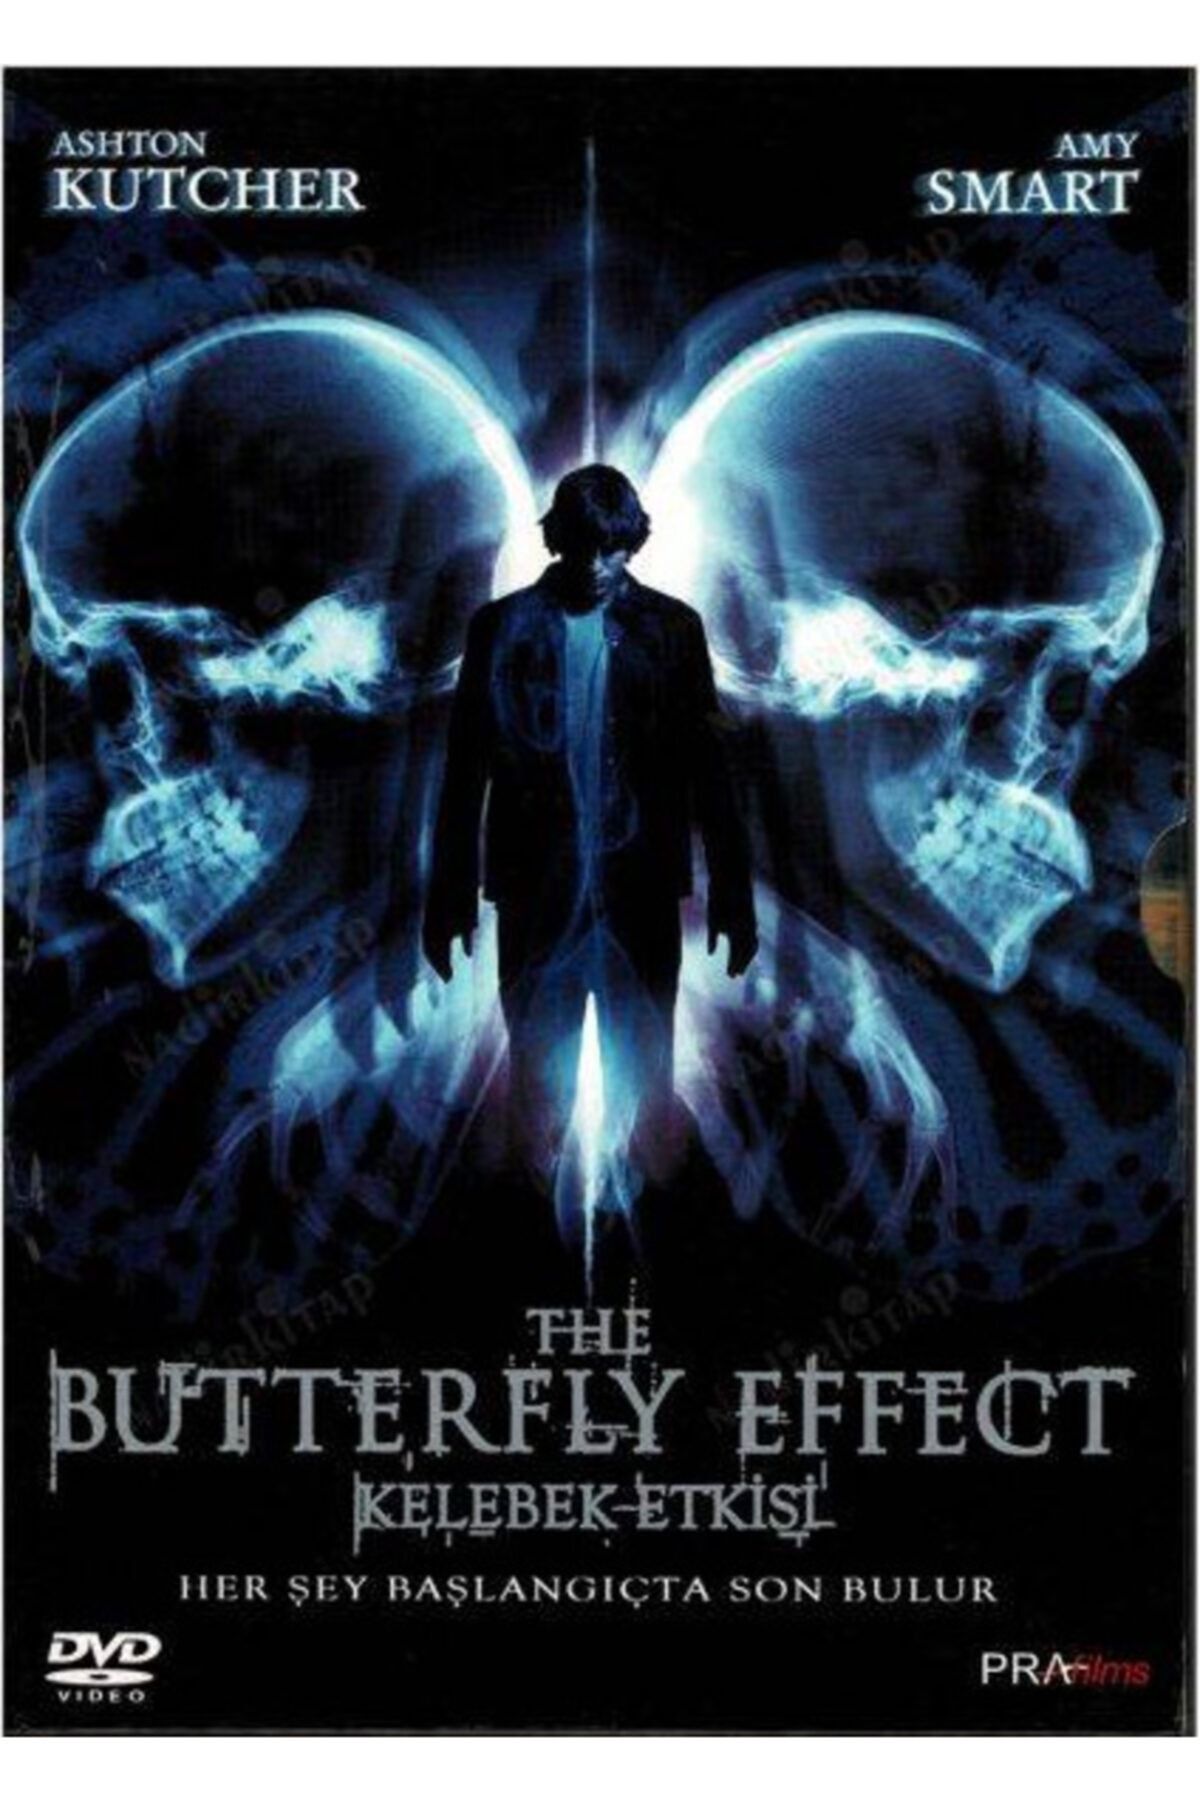 The Butterfly Effect (2004) Theatrical Cut 448Kbps 23.976Fps 48Khz 5.1Ch DVD Turkish Audio TAC